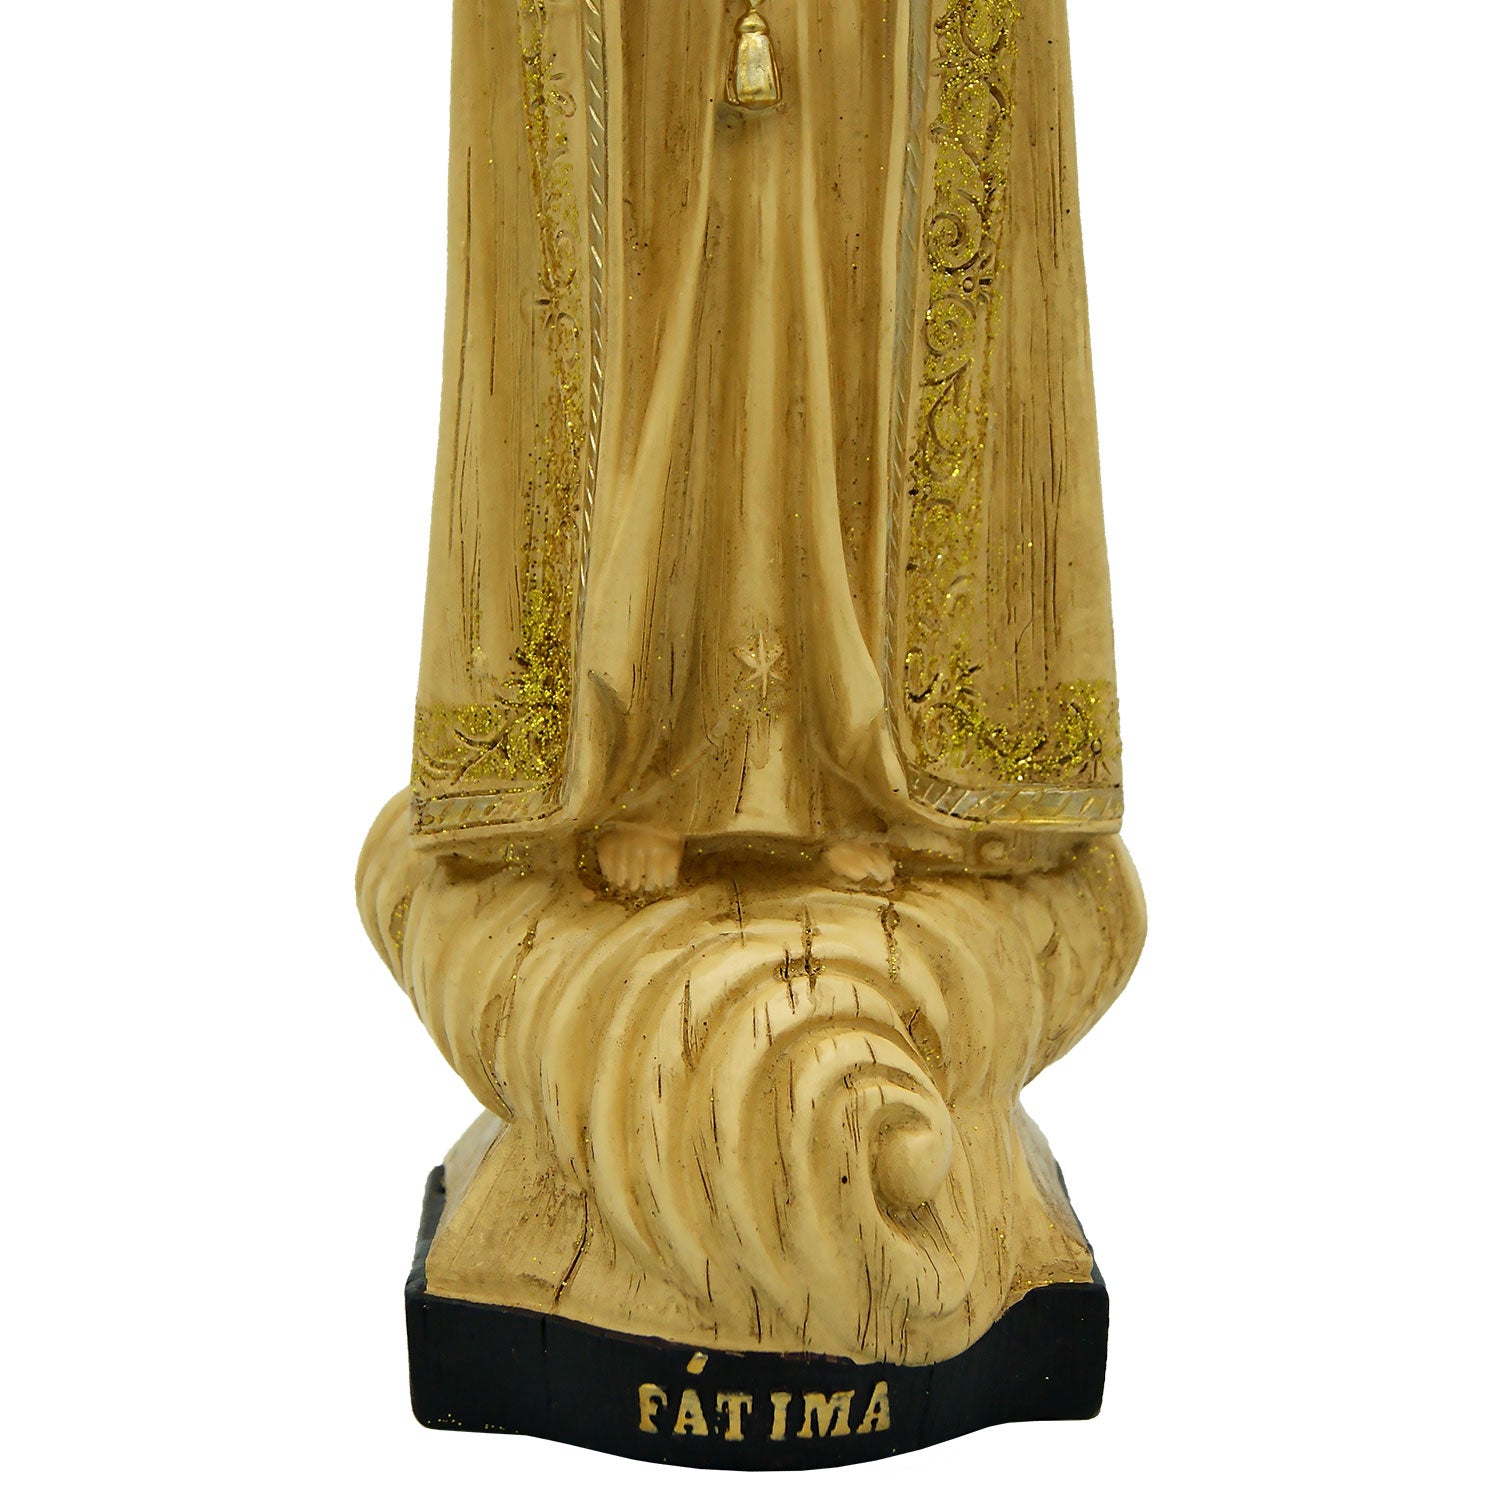 This Our Lady of Fatima statue is made in Fatima, Portugal by the hands of the same artisans that craft the statues of the Shrine of Fatima. The impressive craftsmanship and attention to detail give it a wooden look-alike appearance, although it's made from resin. The figurine sits on a cloud and shows Our Lady wearing a mantle with golden accents painted by hand. On the bottom of the statue it has a music box operated by batteries that plays the Fátima Hymn, Ave.